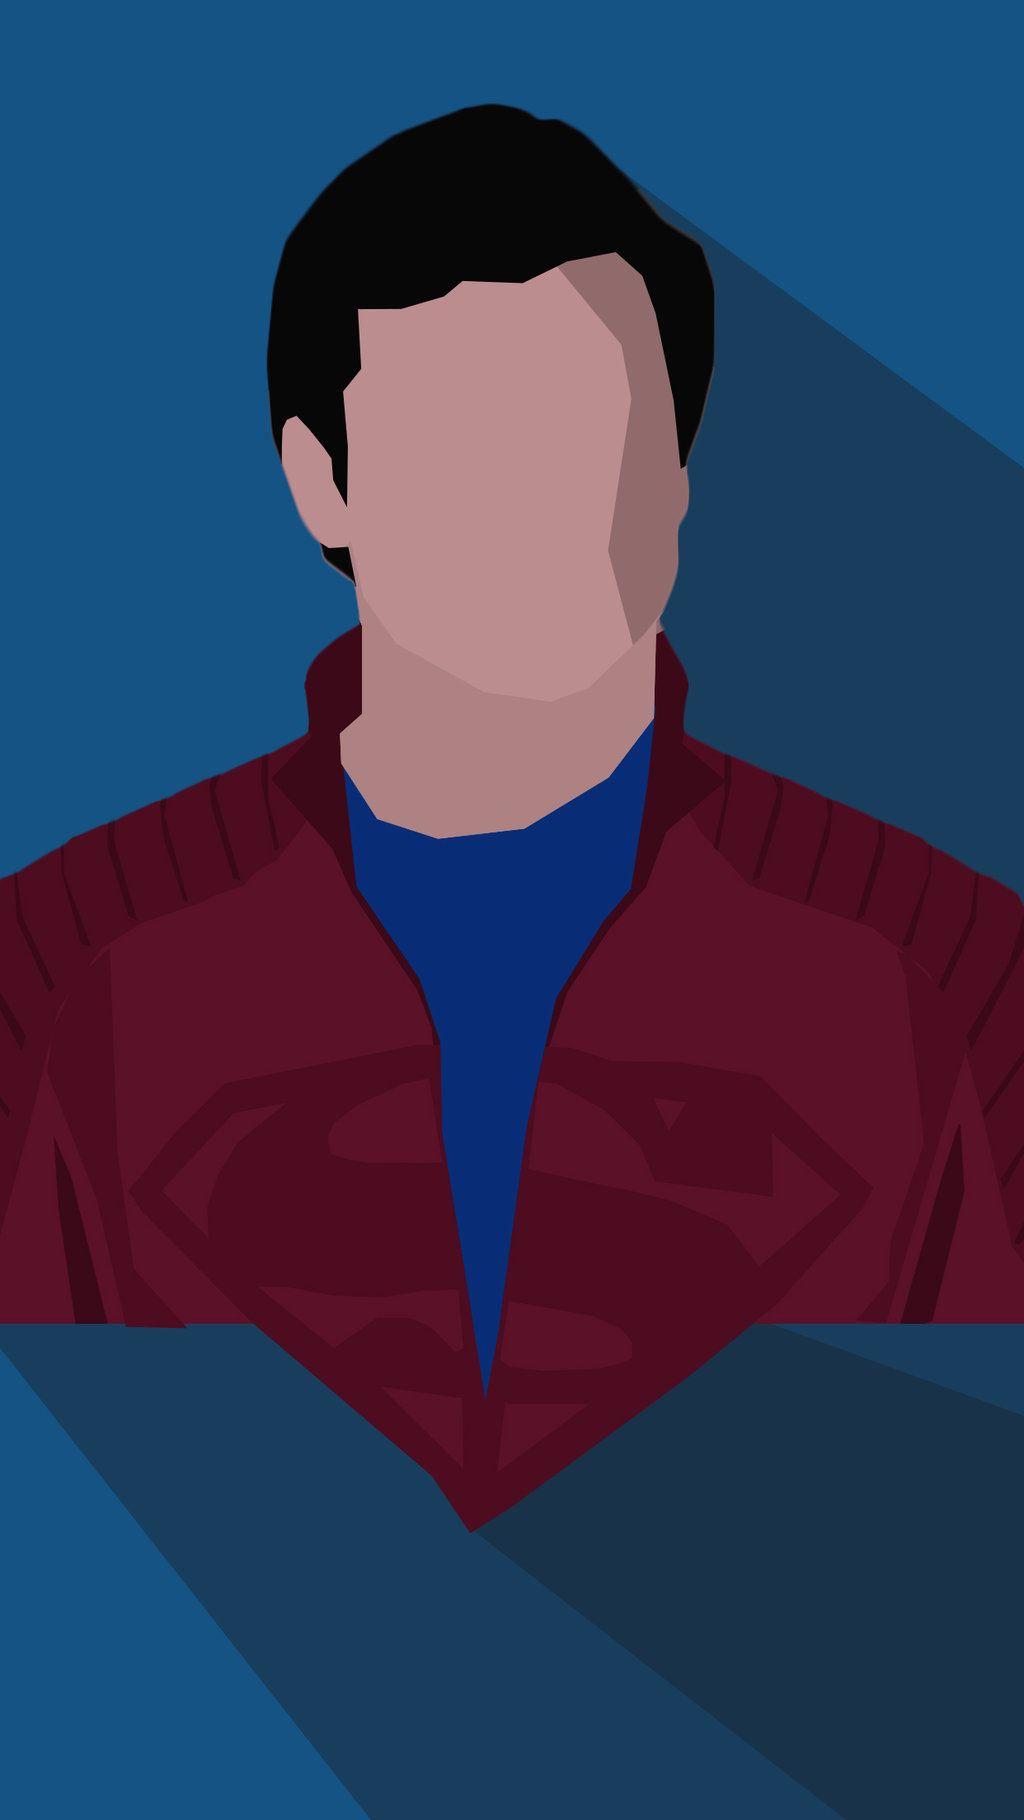 Superman Flat Head IPhone Wallpaper By Spider Maguire